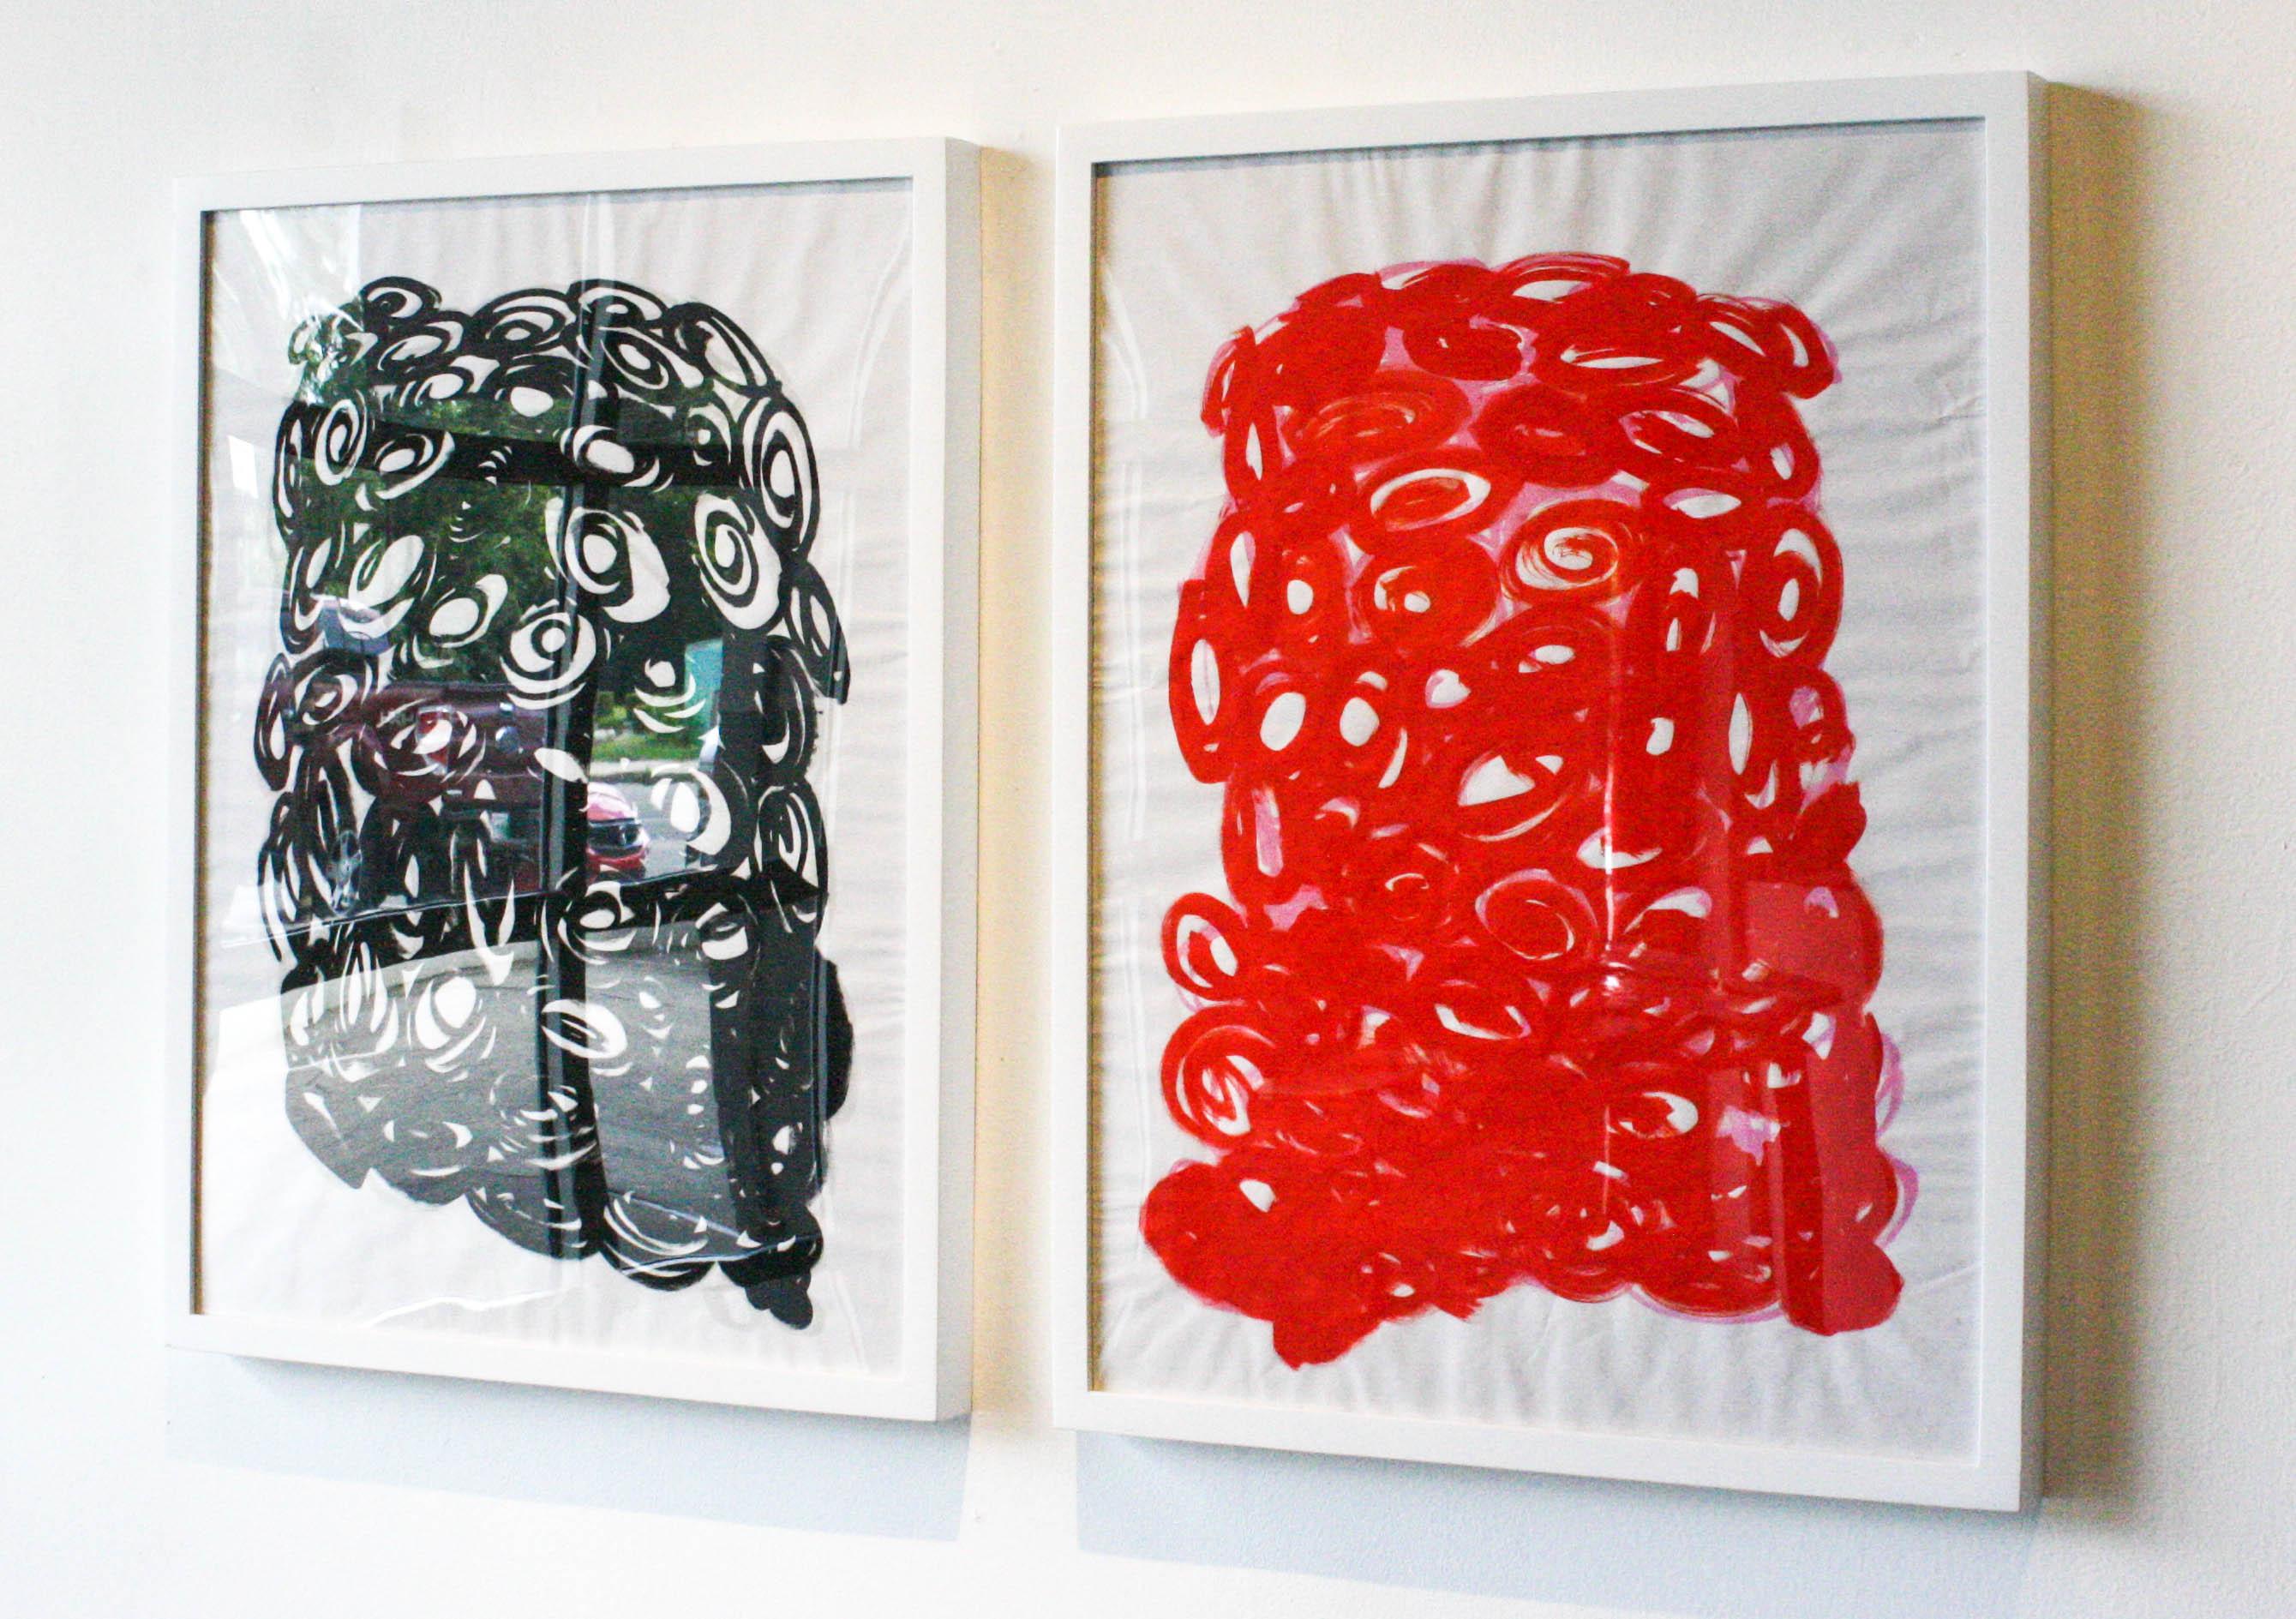 Untitled Diptych- Abstract, Acrylic Paint, Paper, Red, Black, Spirals, Circles - Painting by Duncan McDaniel